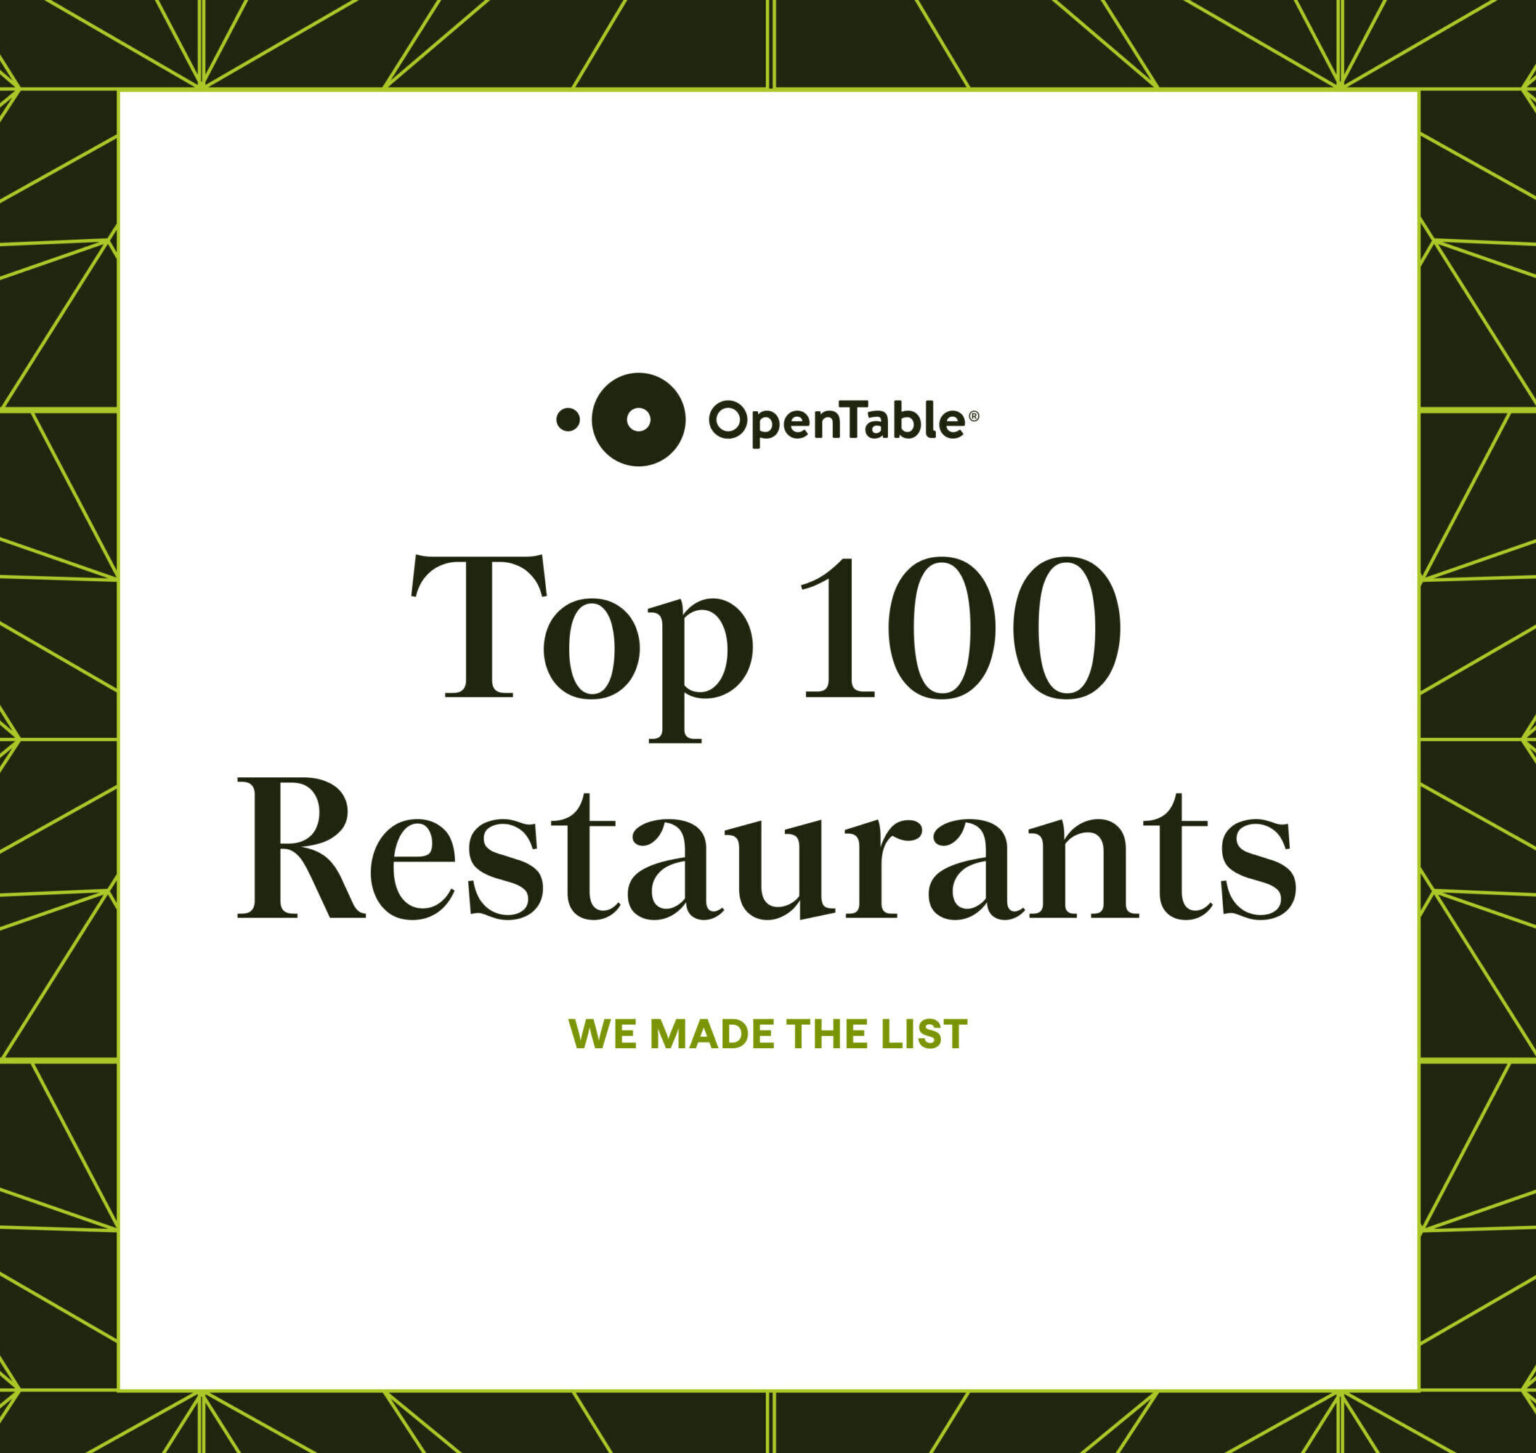 Ancaster Mill is included in OpenTable's Top 100 Restaurants